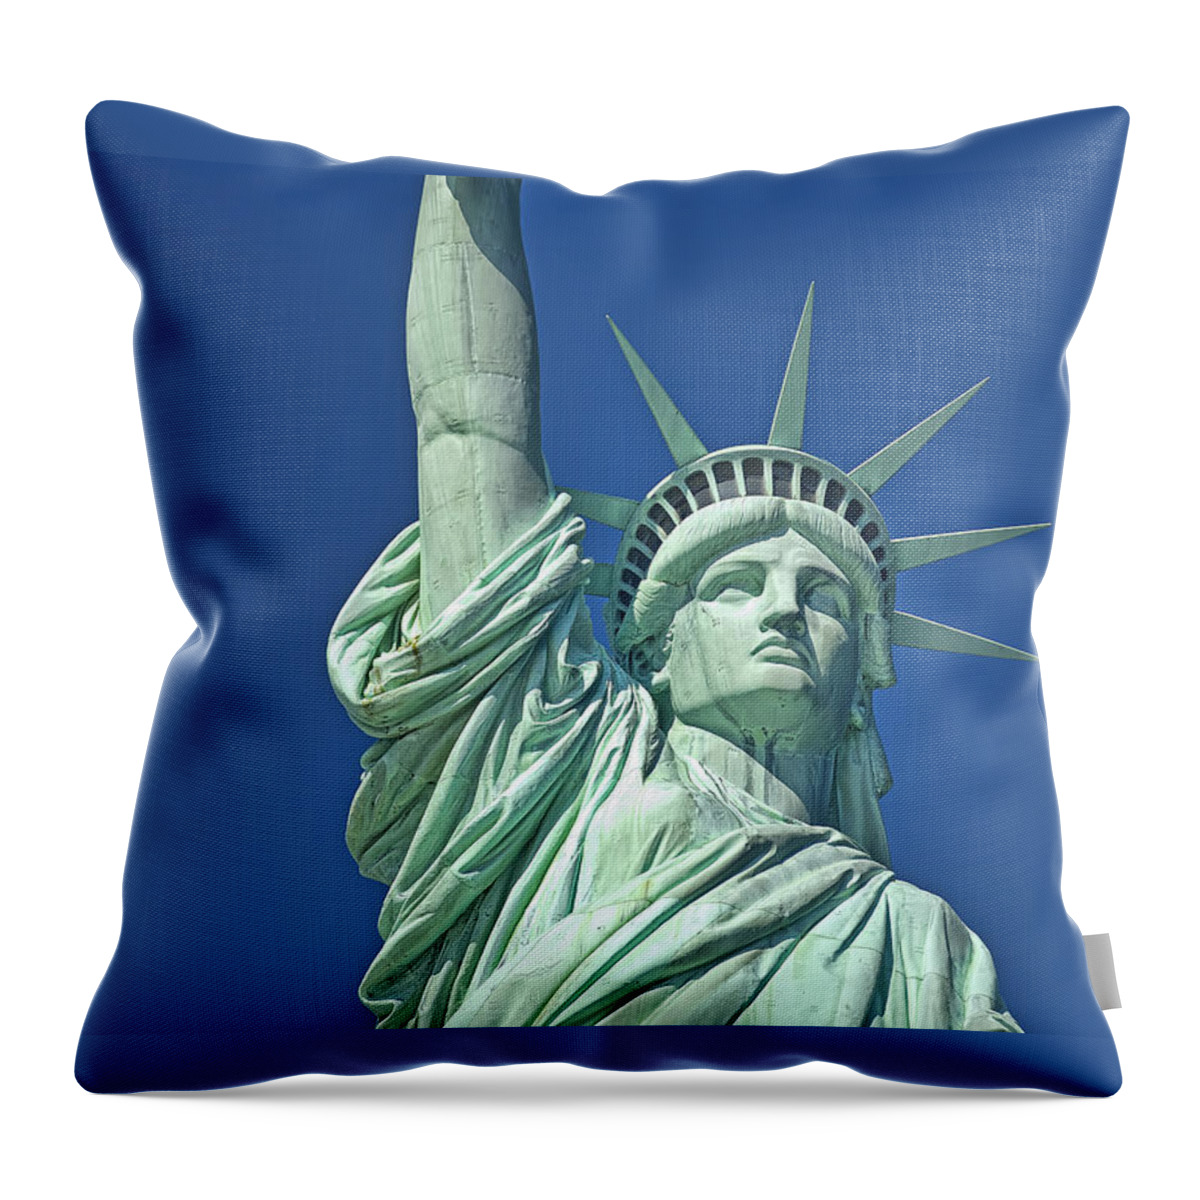 Statue Of Liberty Throw Pillow featuring the photograph Liberty by Mark Harrington